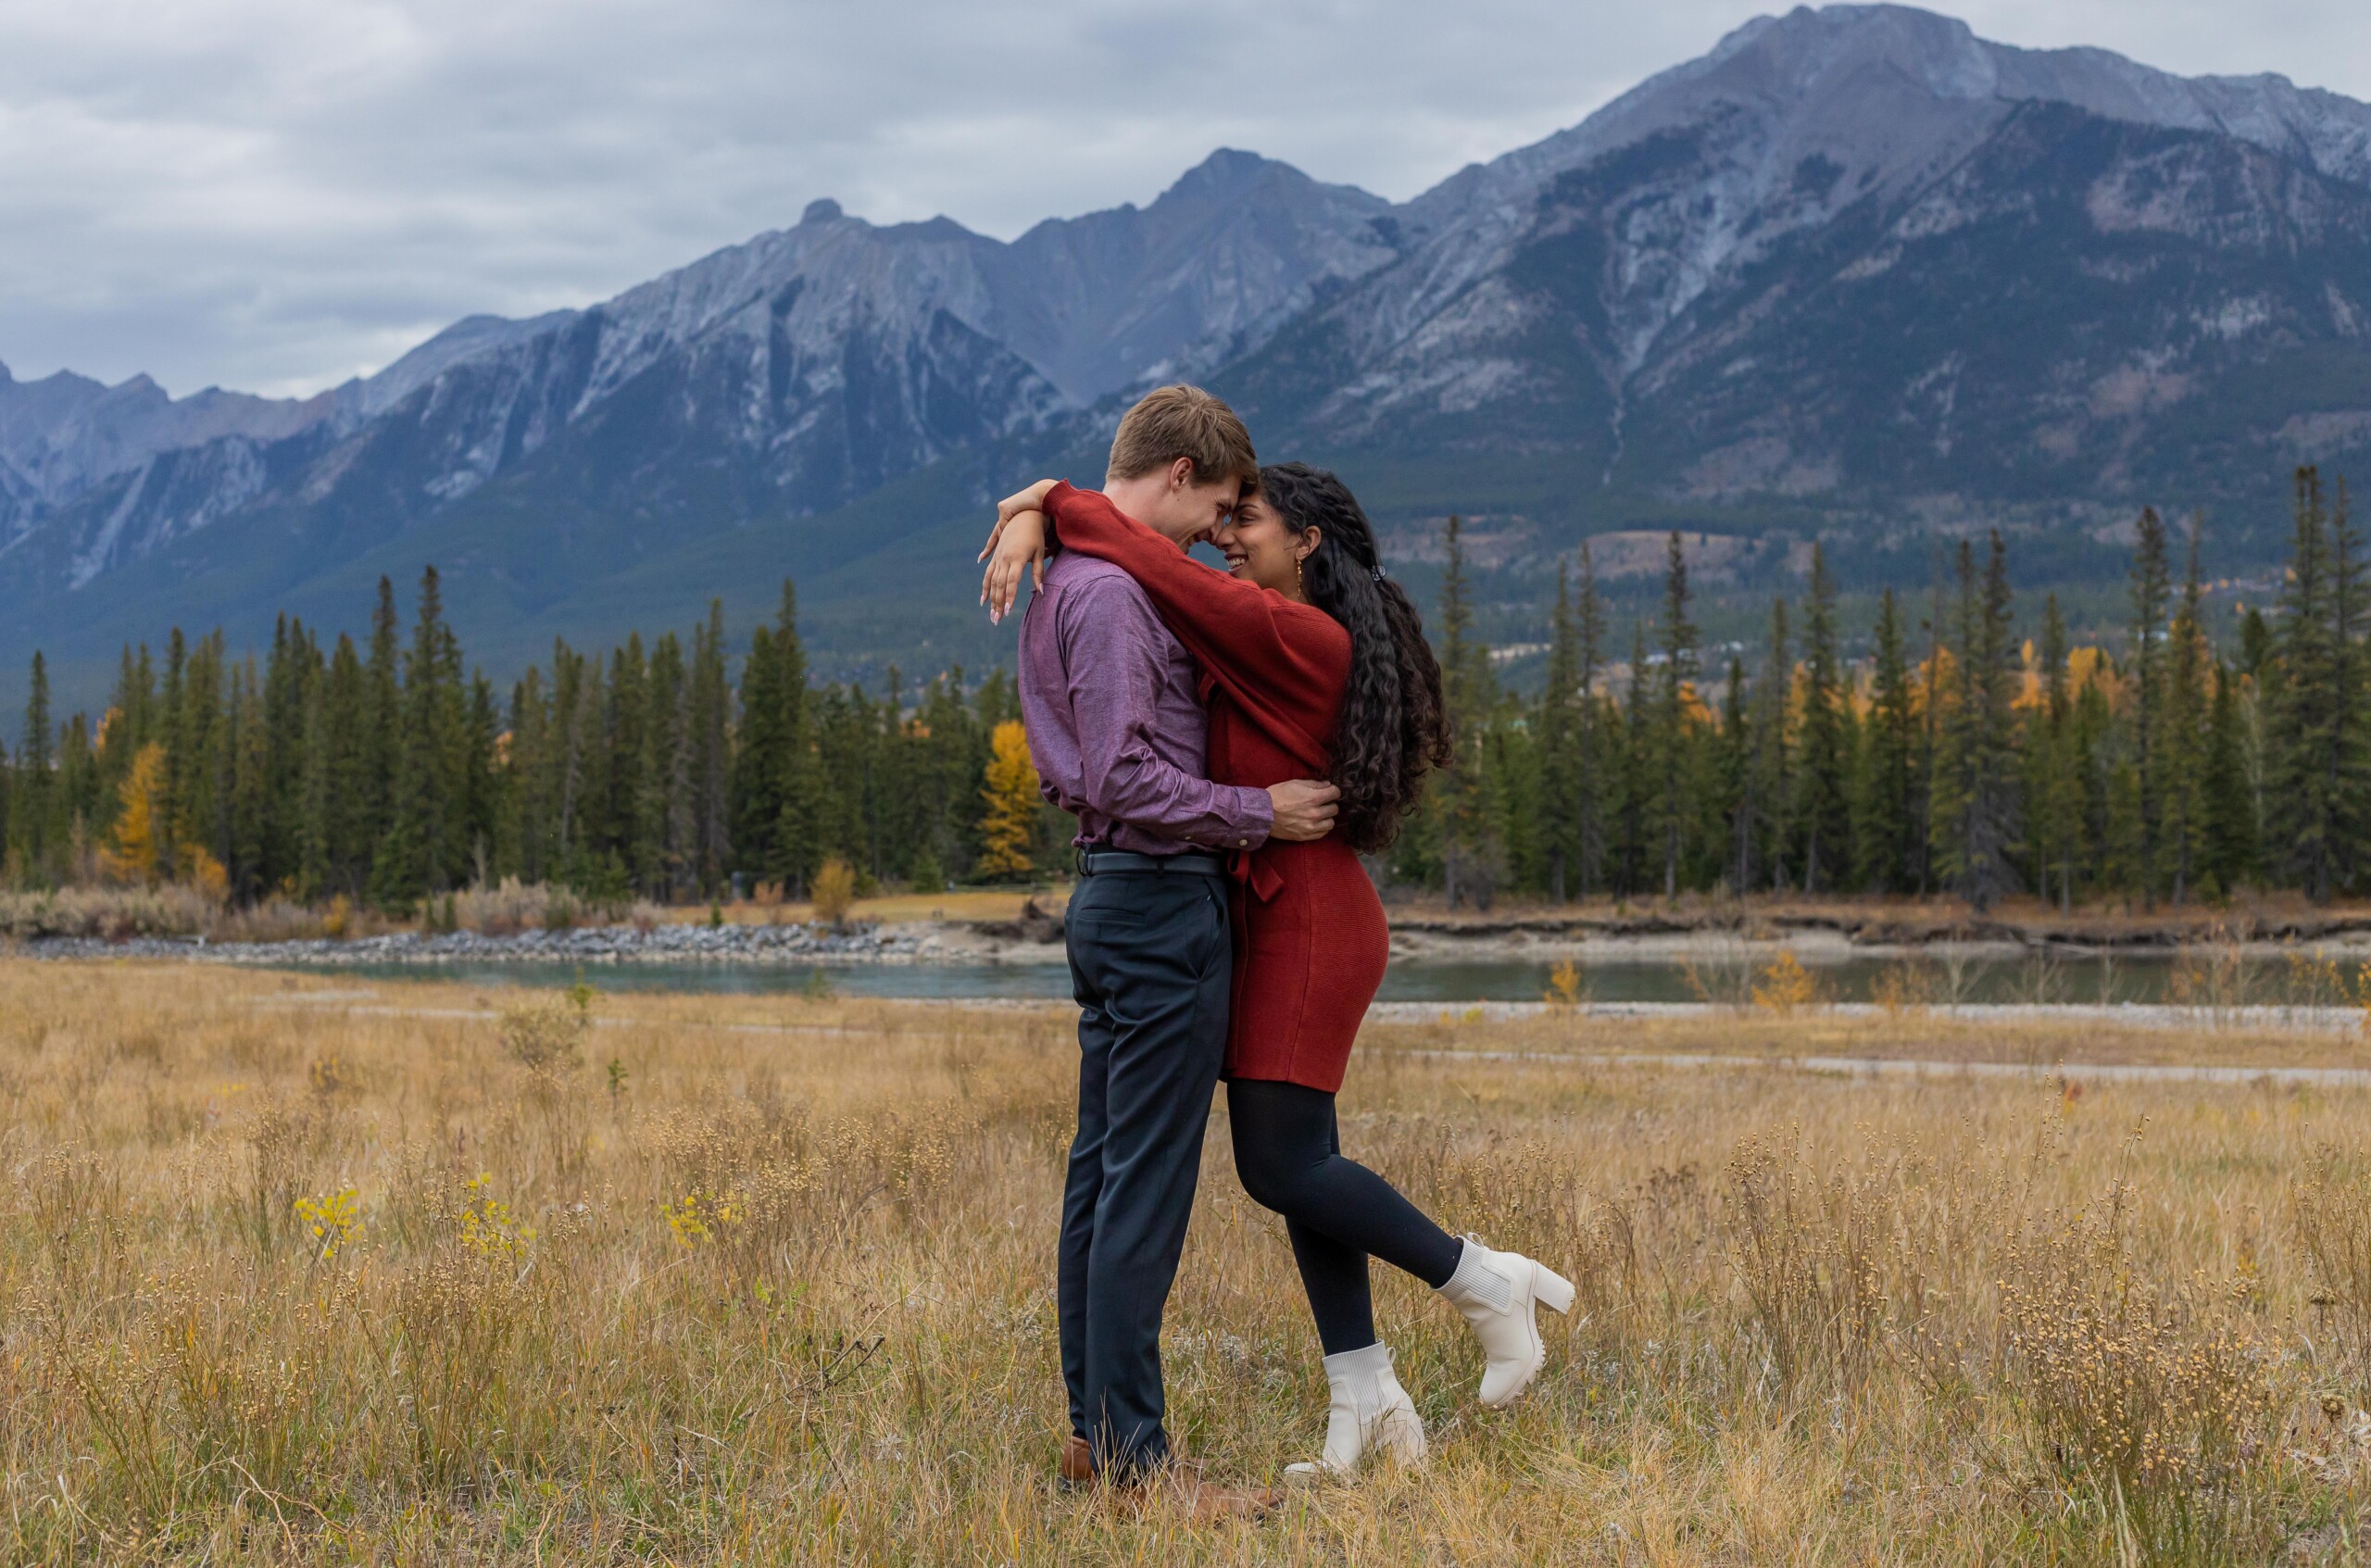 Engagement photoshoot by Solana, Localgrapher in Canmore